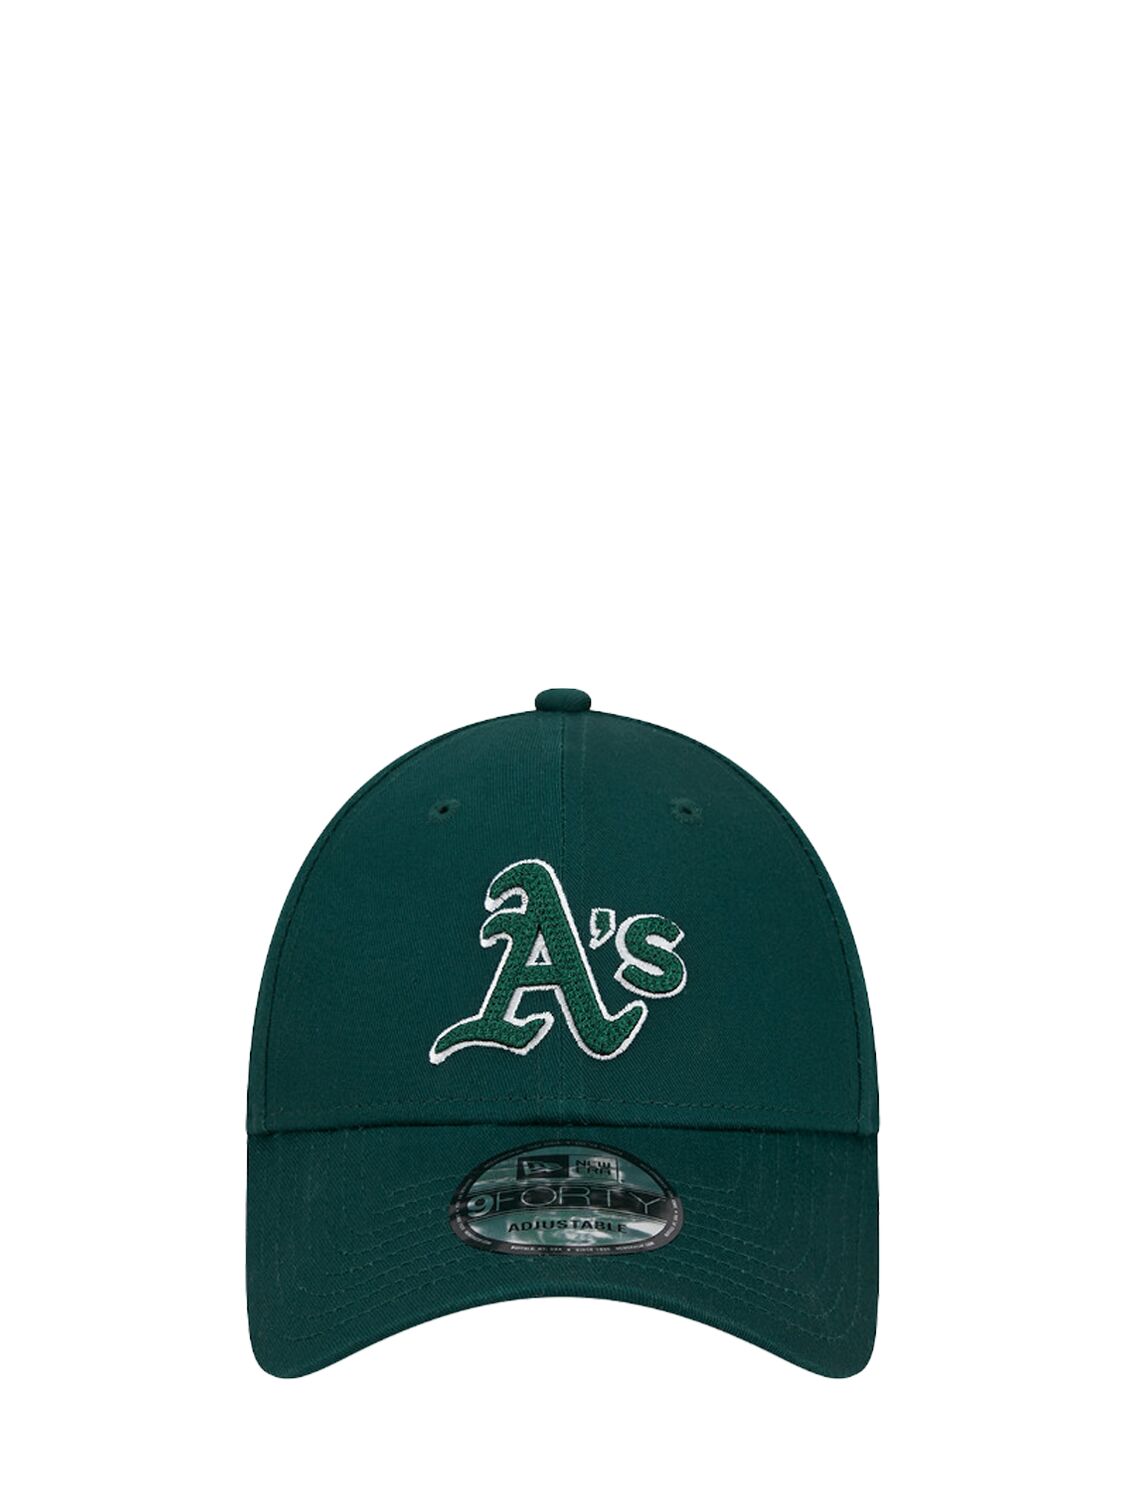 New Era 9forty New Traditions Hat In Green,white